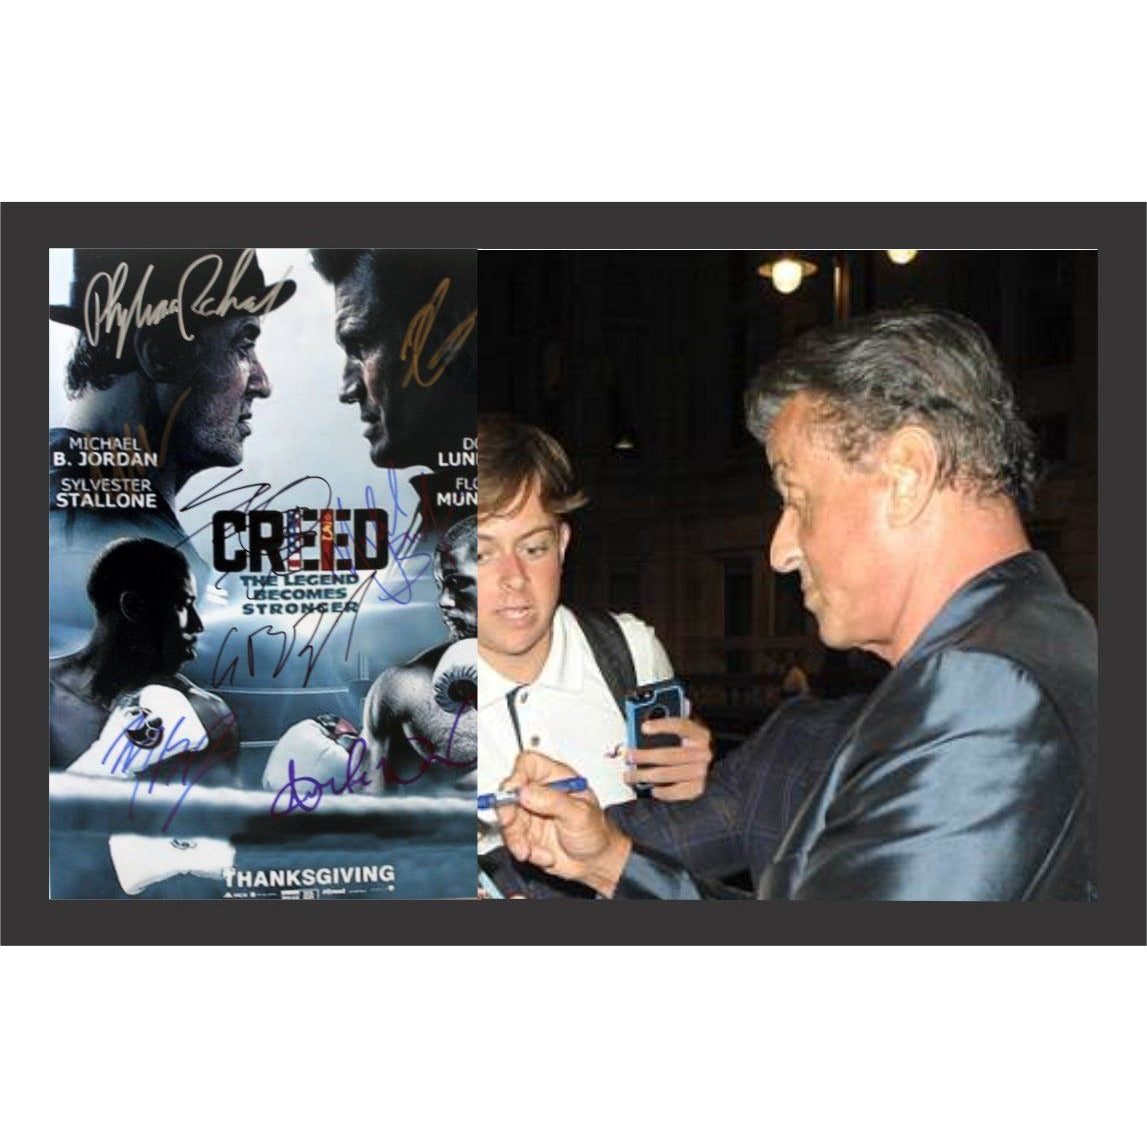 Creed Sylvester Stallone Carl Weathers Michael B Jordan 11 by 14 movie poster signed with proof